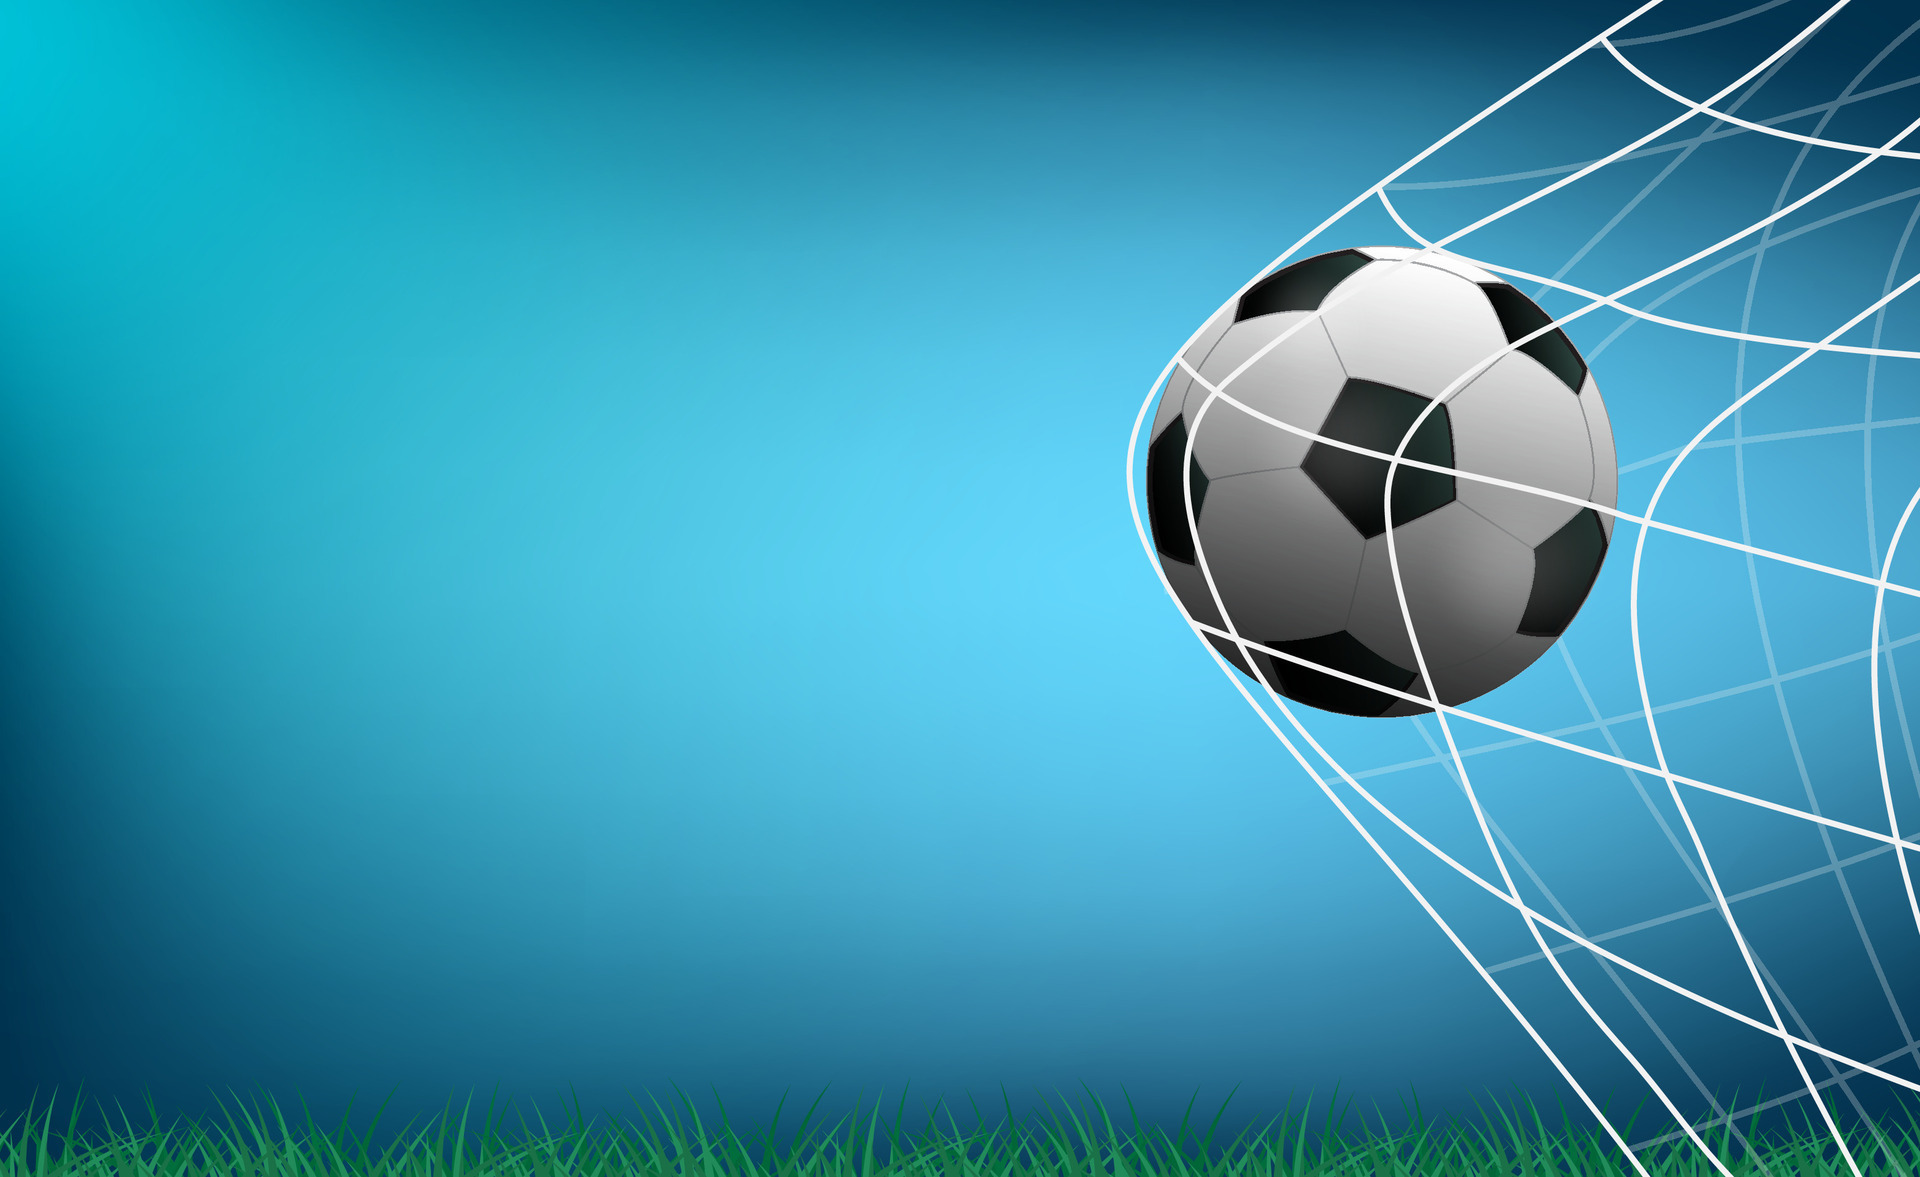 Soccer or football background Poster